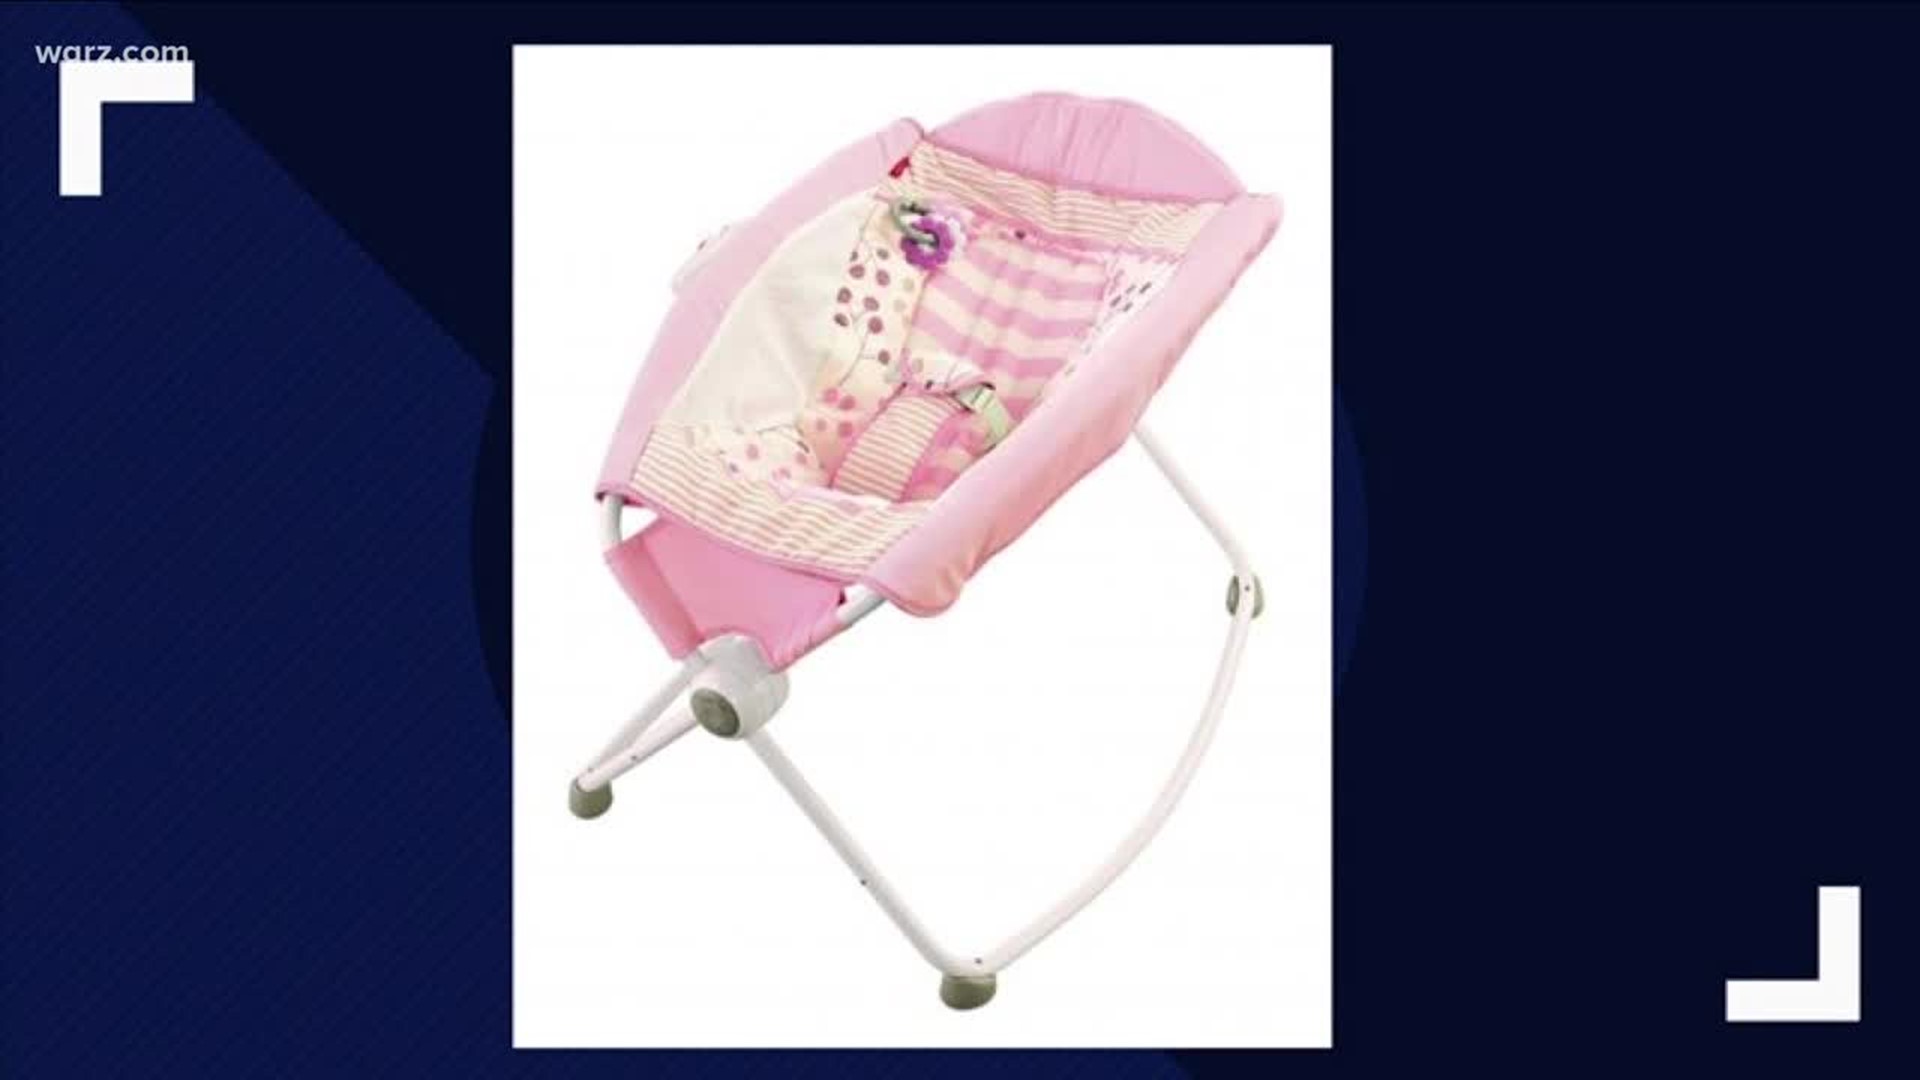 Fisher-Price Rock 'n Play sleepers recalled after infant deaths